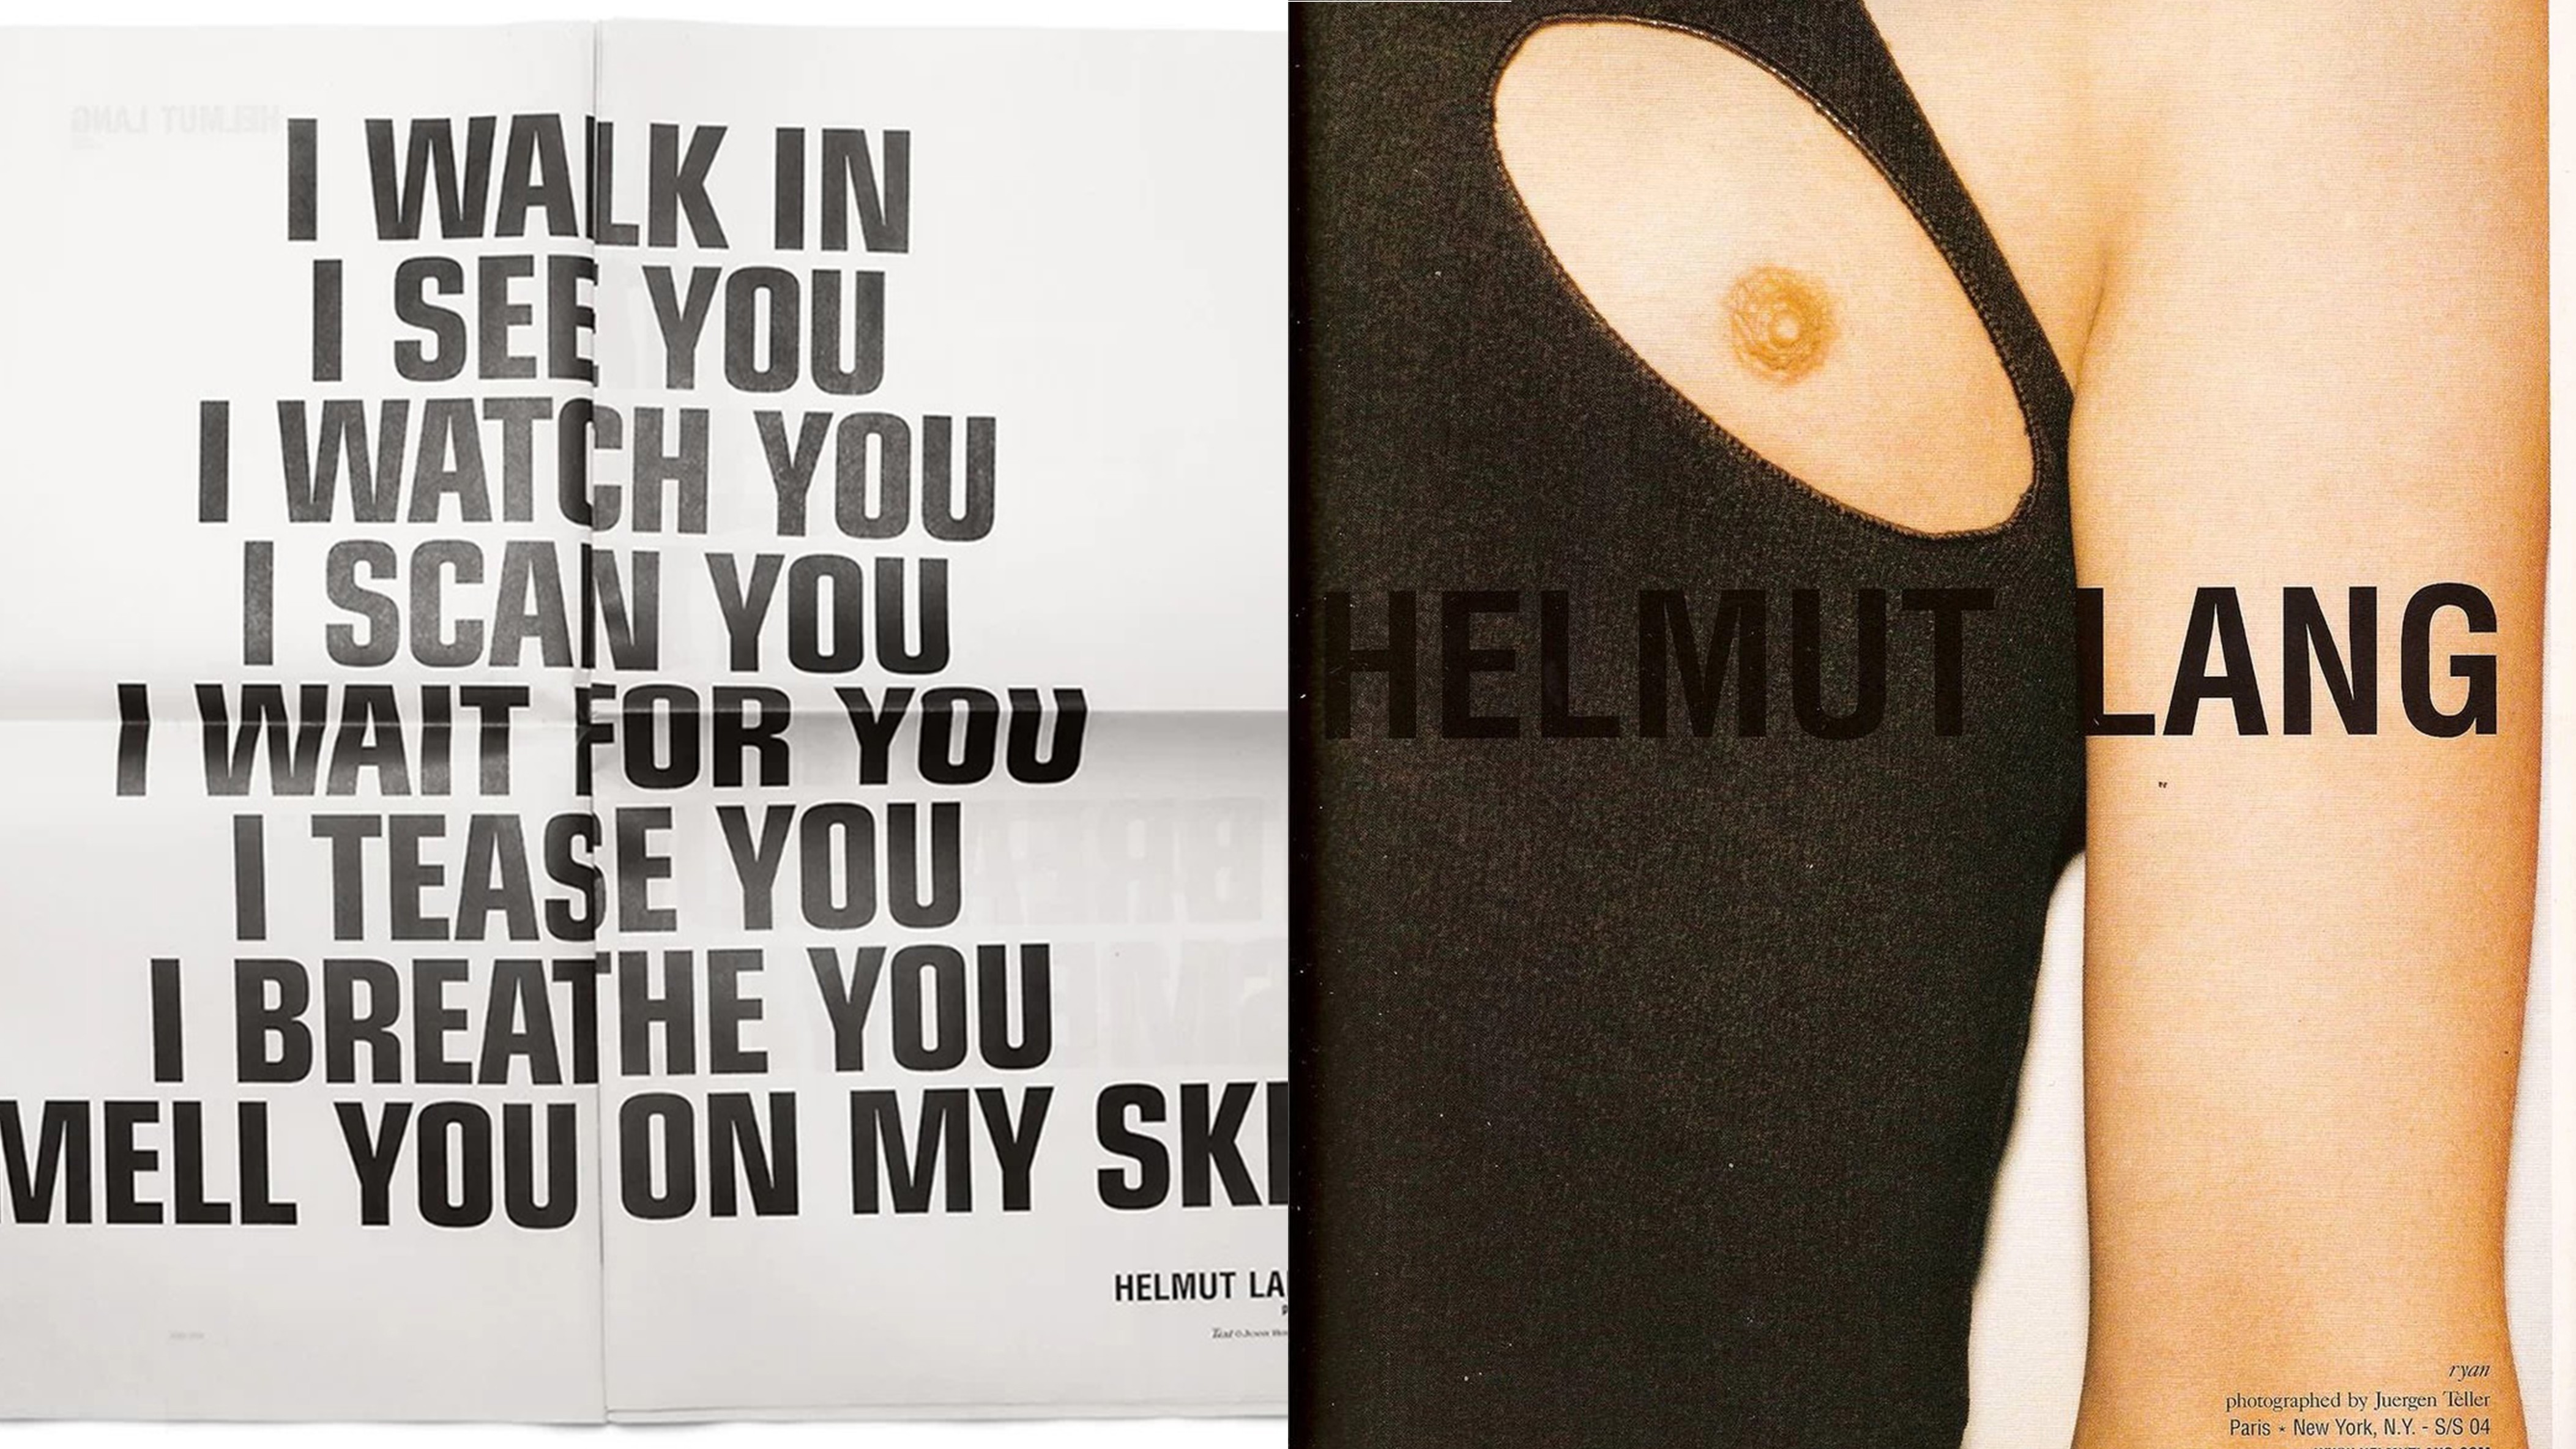 A New Helmut Lang Archives Book Comes to New York With a Traveling